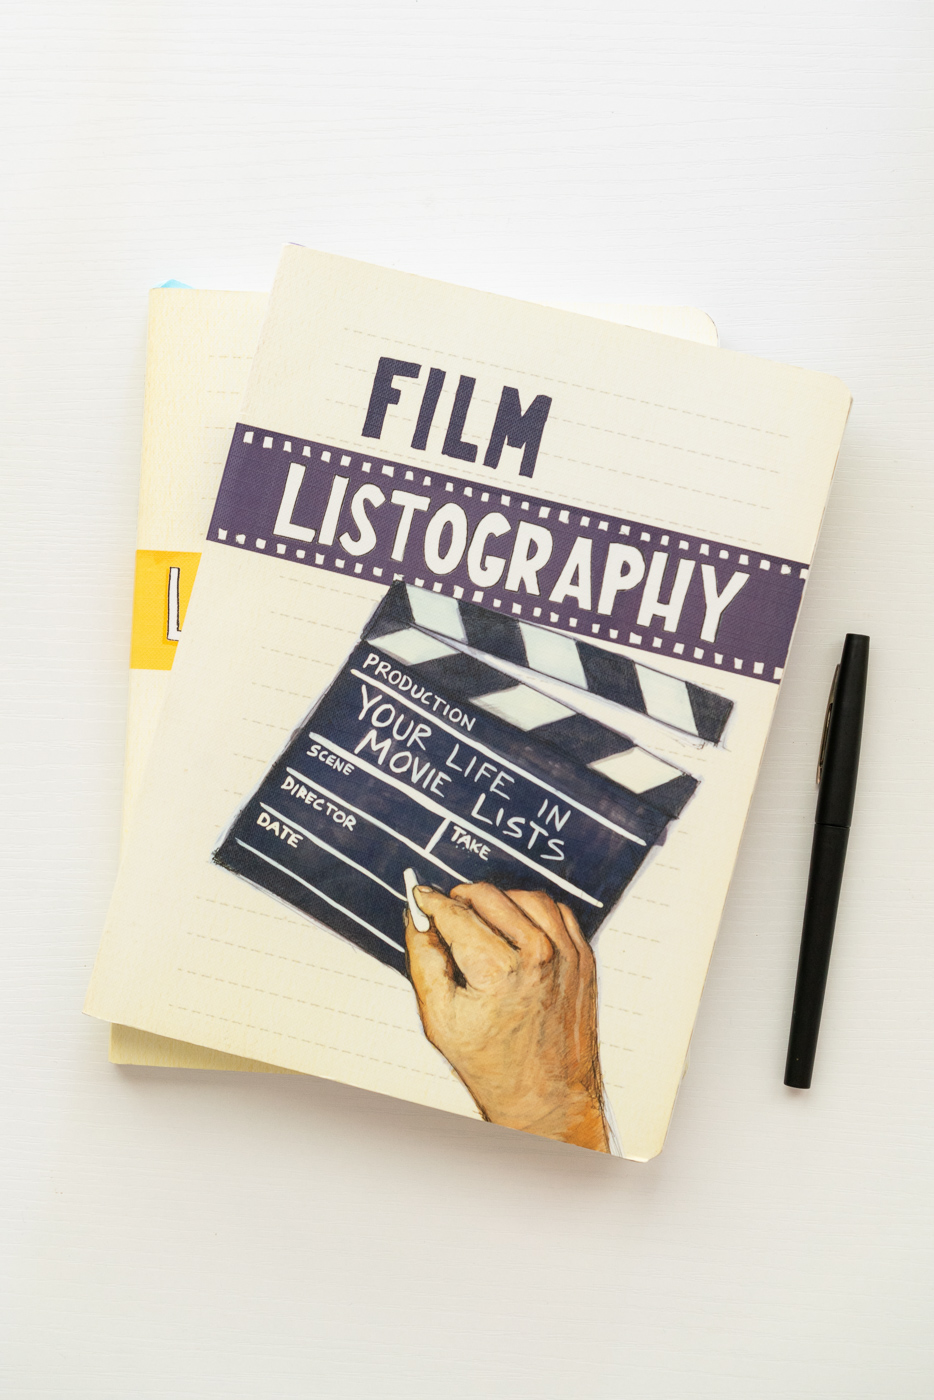 A stack of Listography books featuring Film Listography: Your Life in Movie Lists